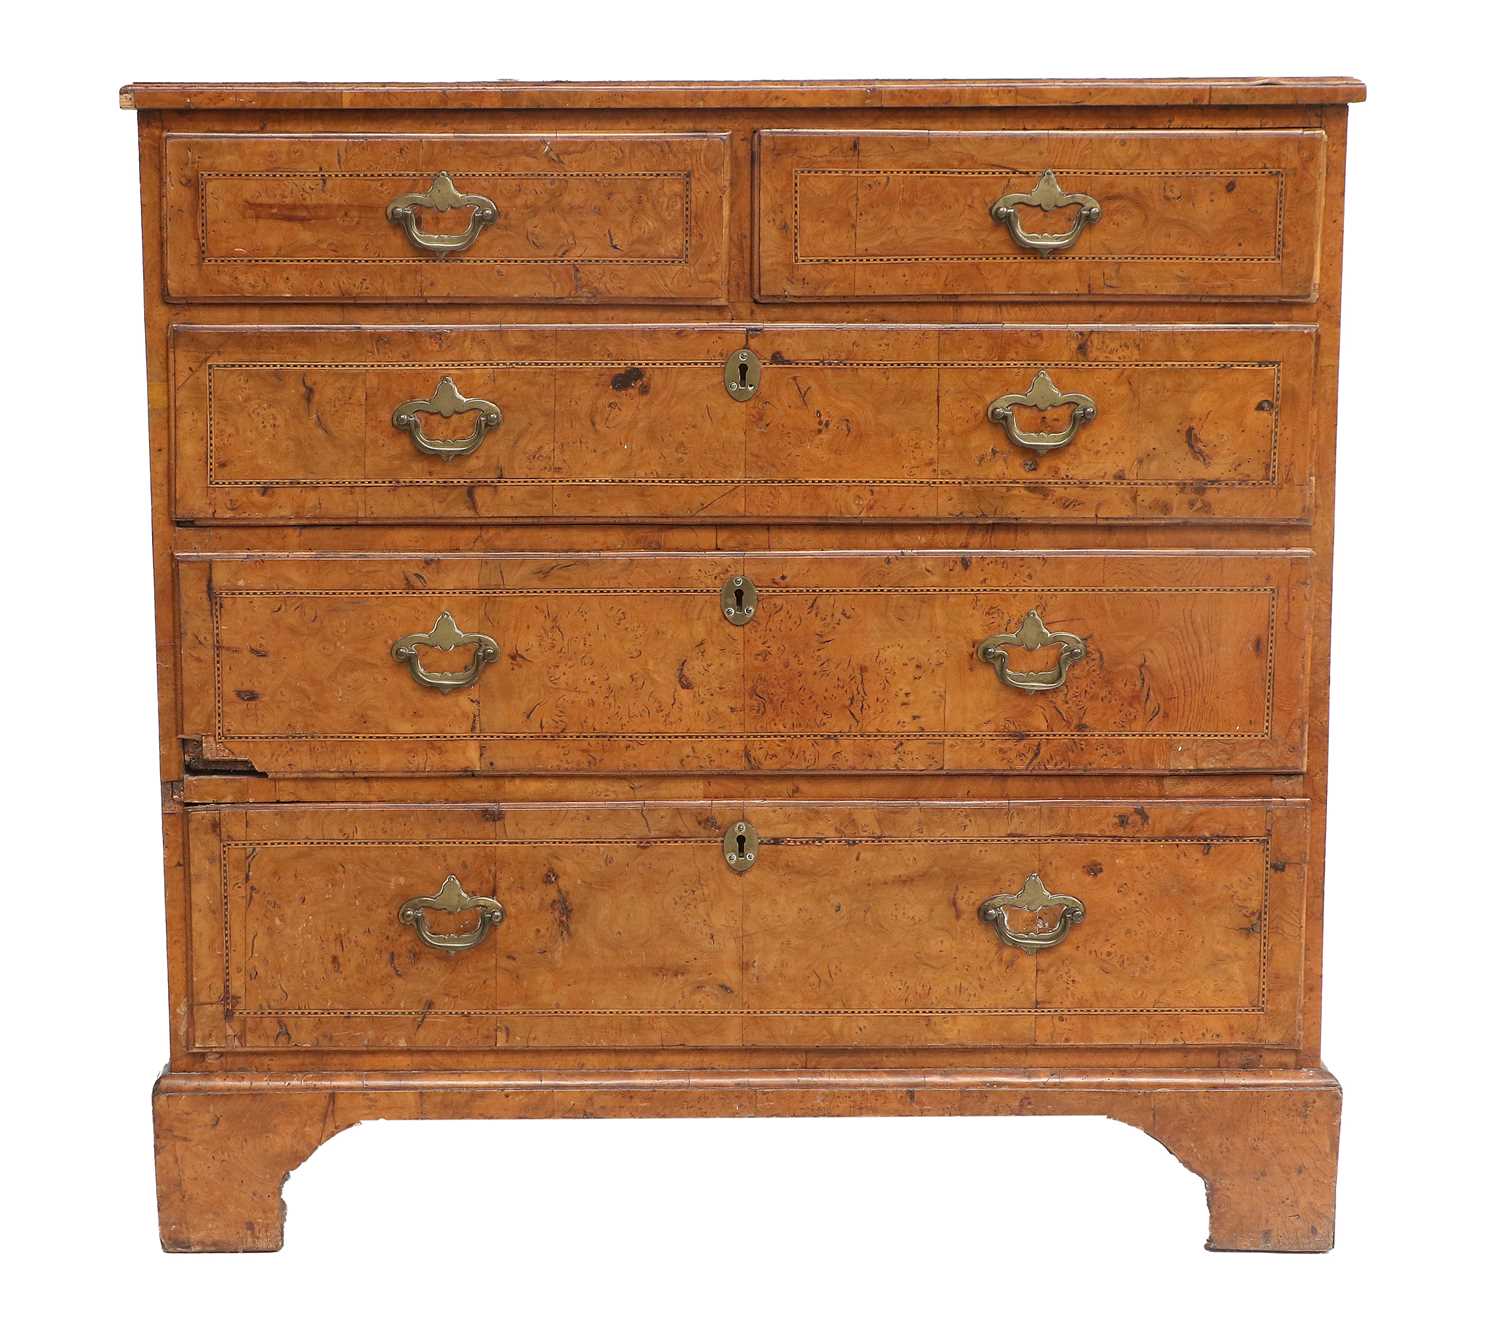 A George I Burr Walnut and Parquetry-Decorated Straight-Front Chest of Drawers, early 18th